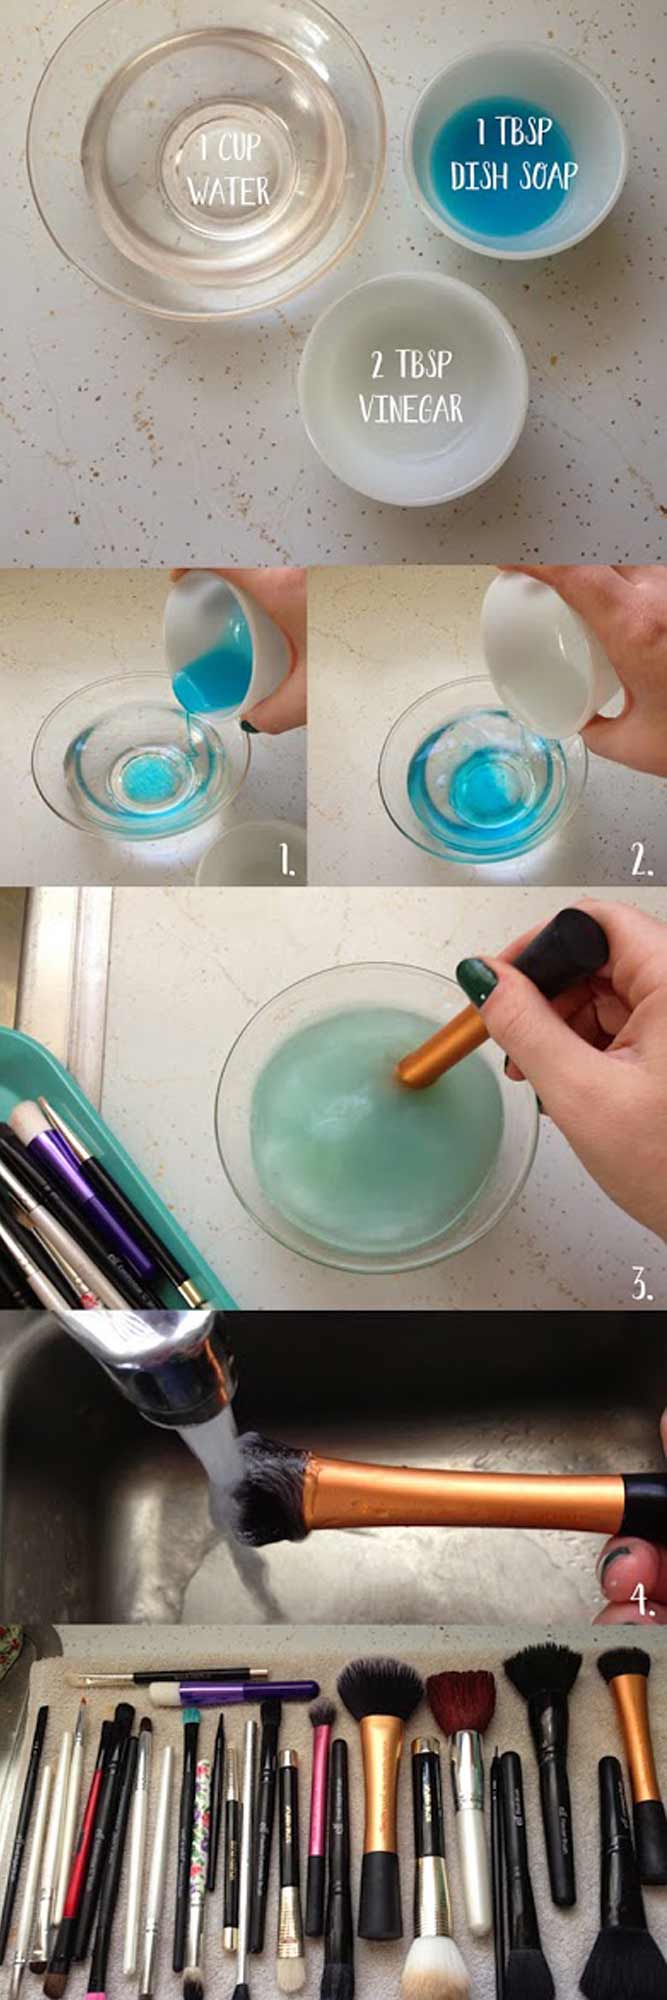 How to Clean Makeup Brushes Easily at Home